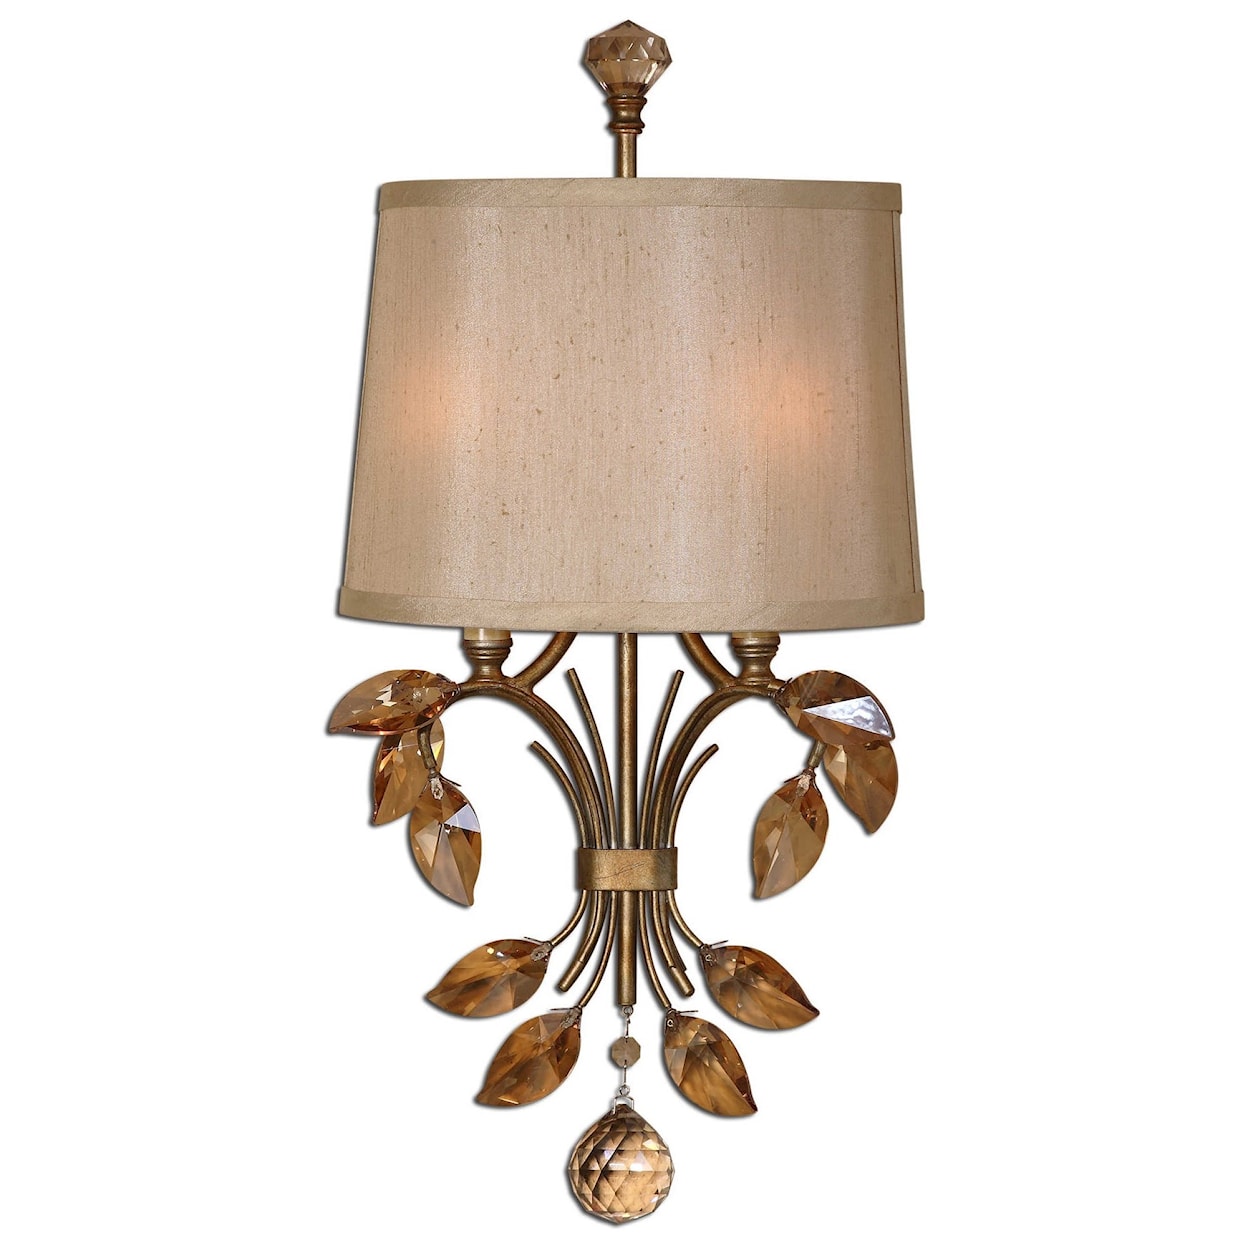 Uttermost Lighting Fixtures - Wall Sconces Alenya 2 Light Wall Sconce